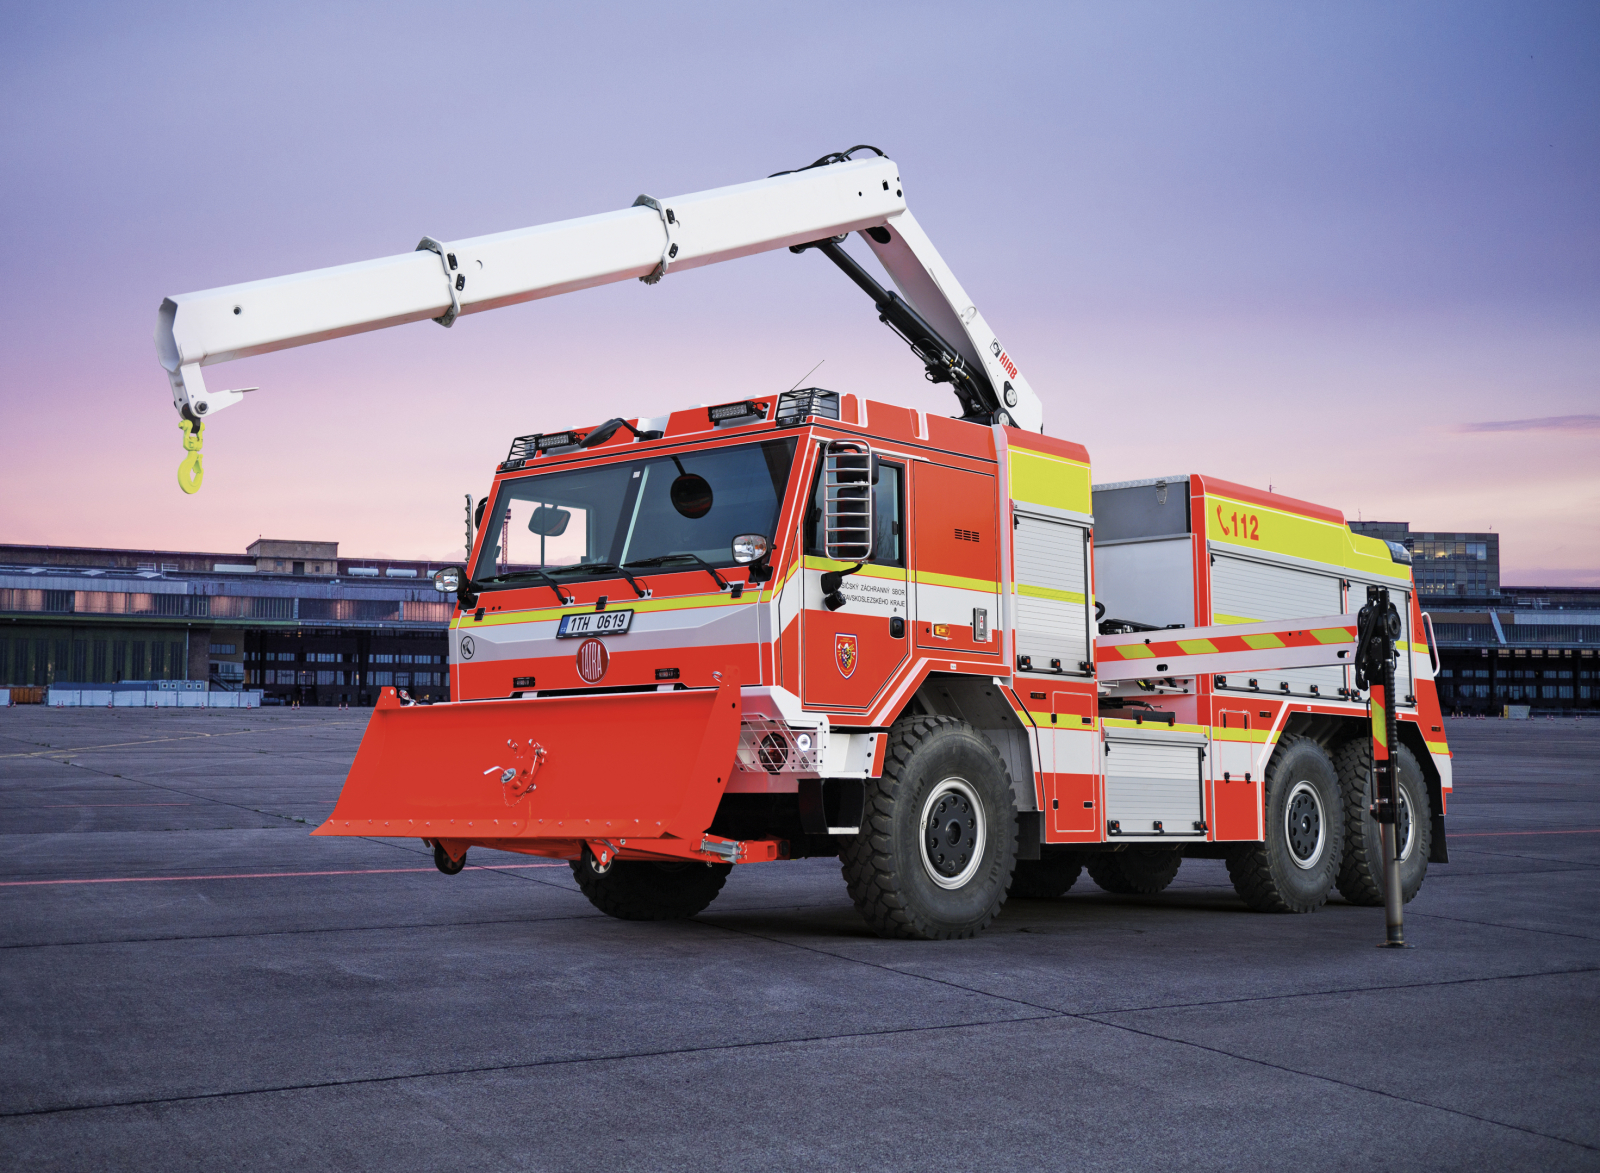 CONTSYSTEM delivered the Low Transportation Height HIAB crane for the Rescue vehicle to the Czech Firefighters